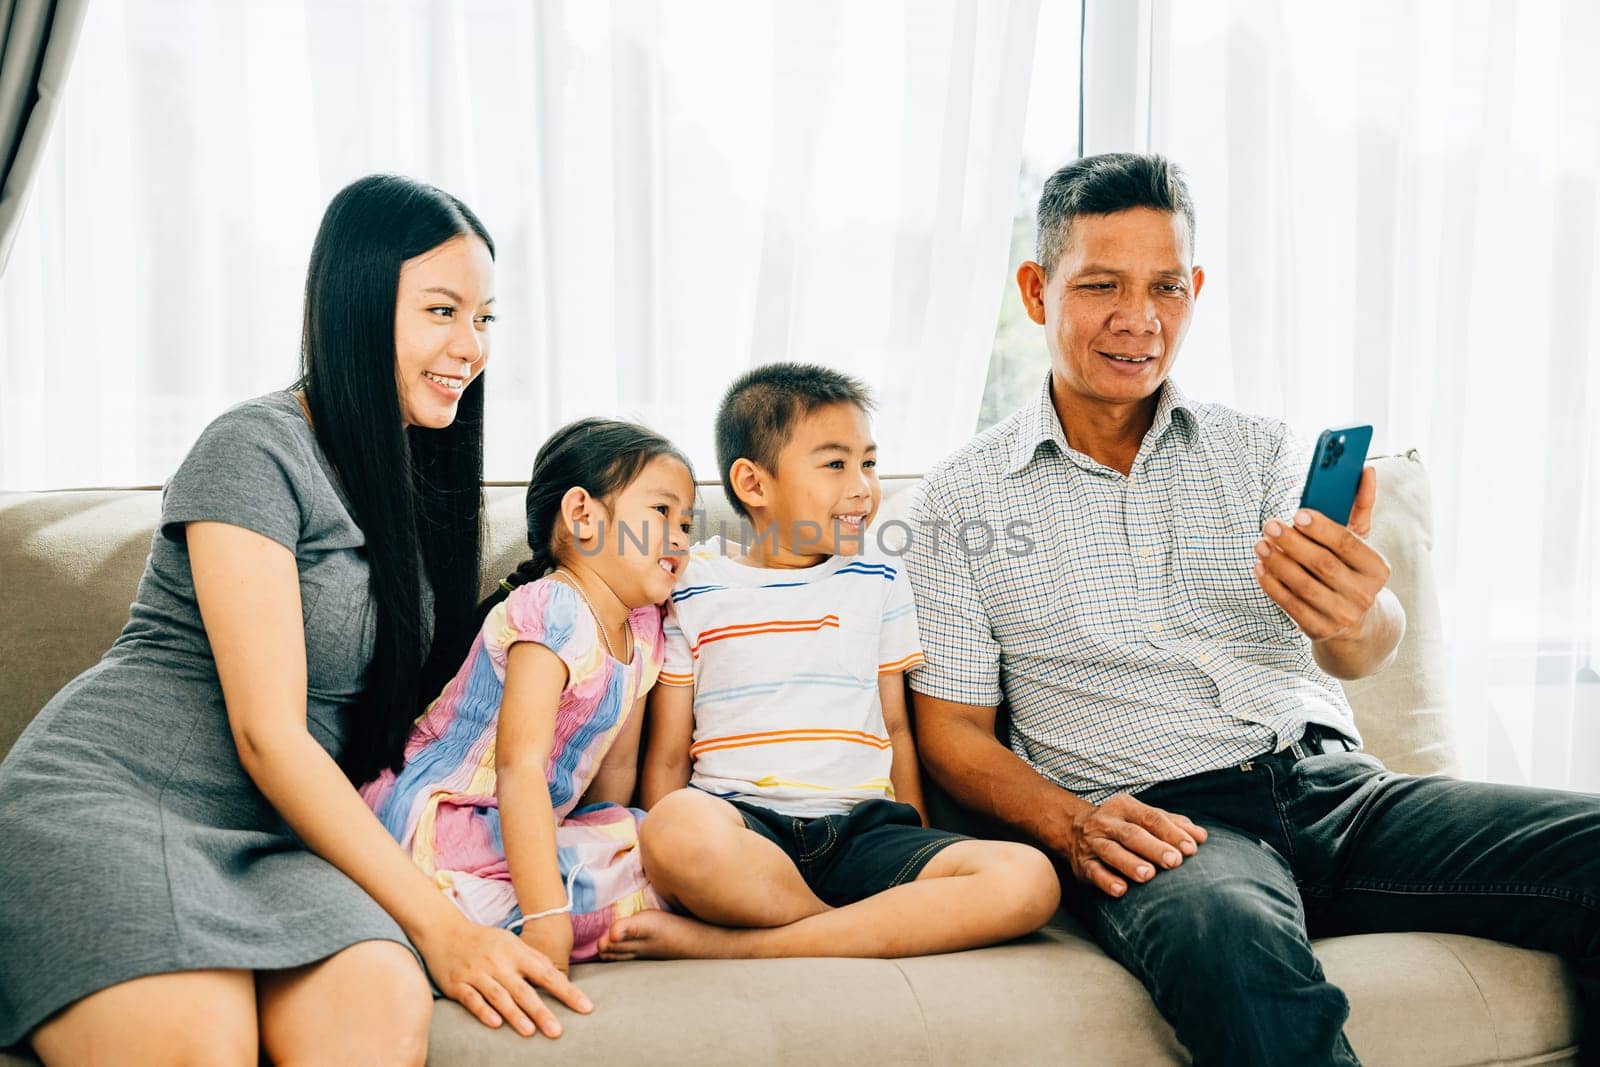 Parents and children laugh entertained by smartphone videos on a couch by Sorapop